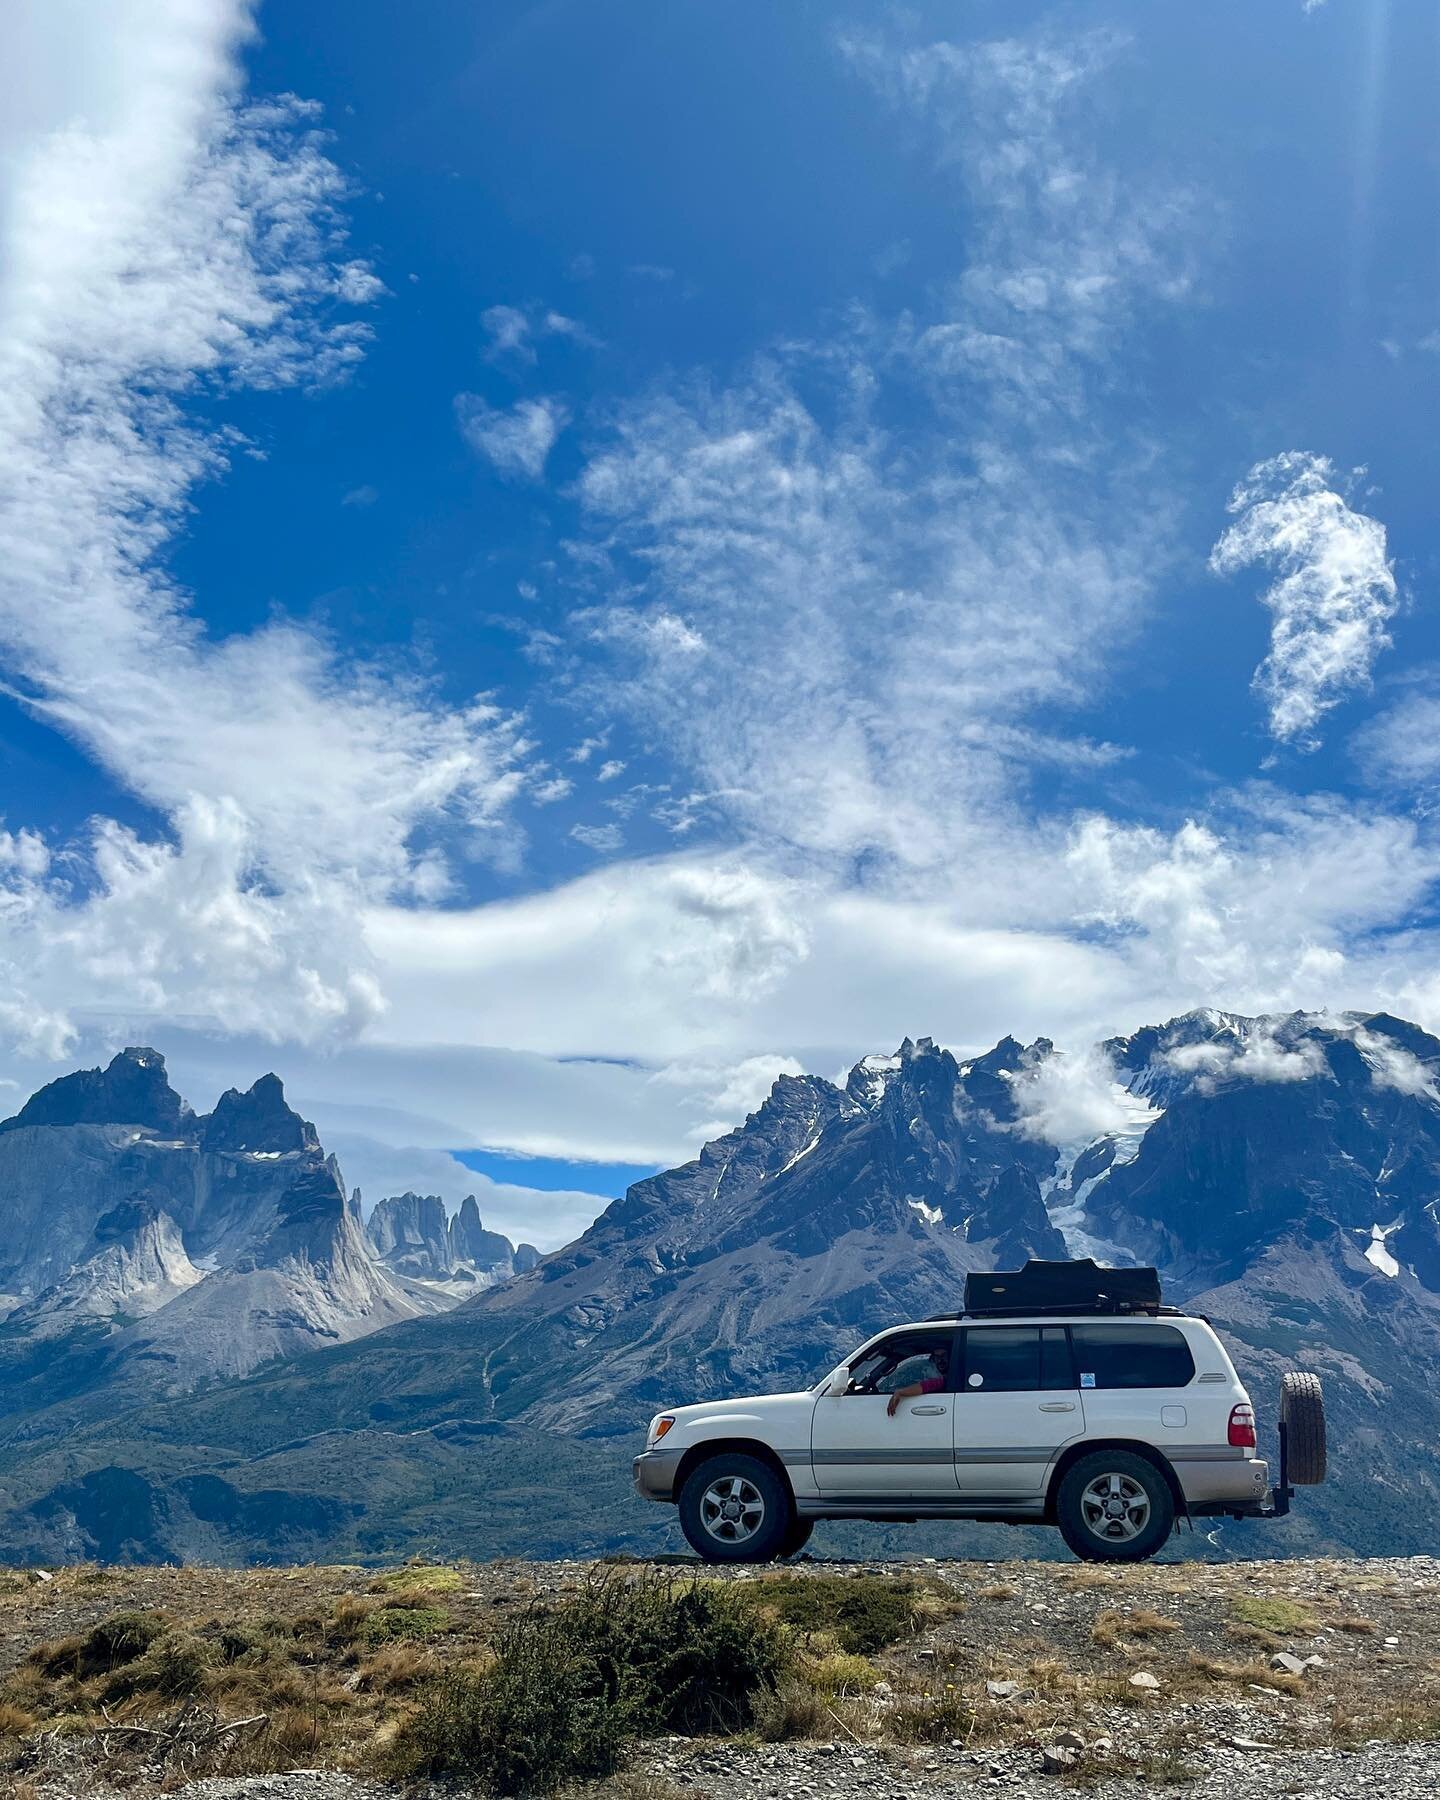 Instagram vs Reality // The Land Cruiser is a little rough around the edges on our return trip to Buenos Aires. We got stuck for a couple weeks in the south of Chile waiting to have our car repaired after fender bender. Unfortunately, an existing iss